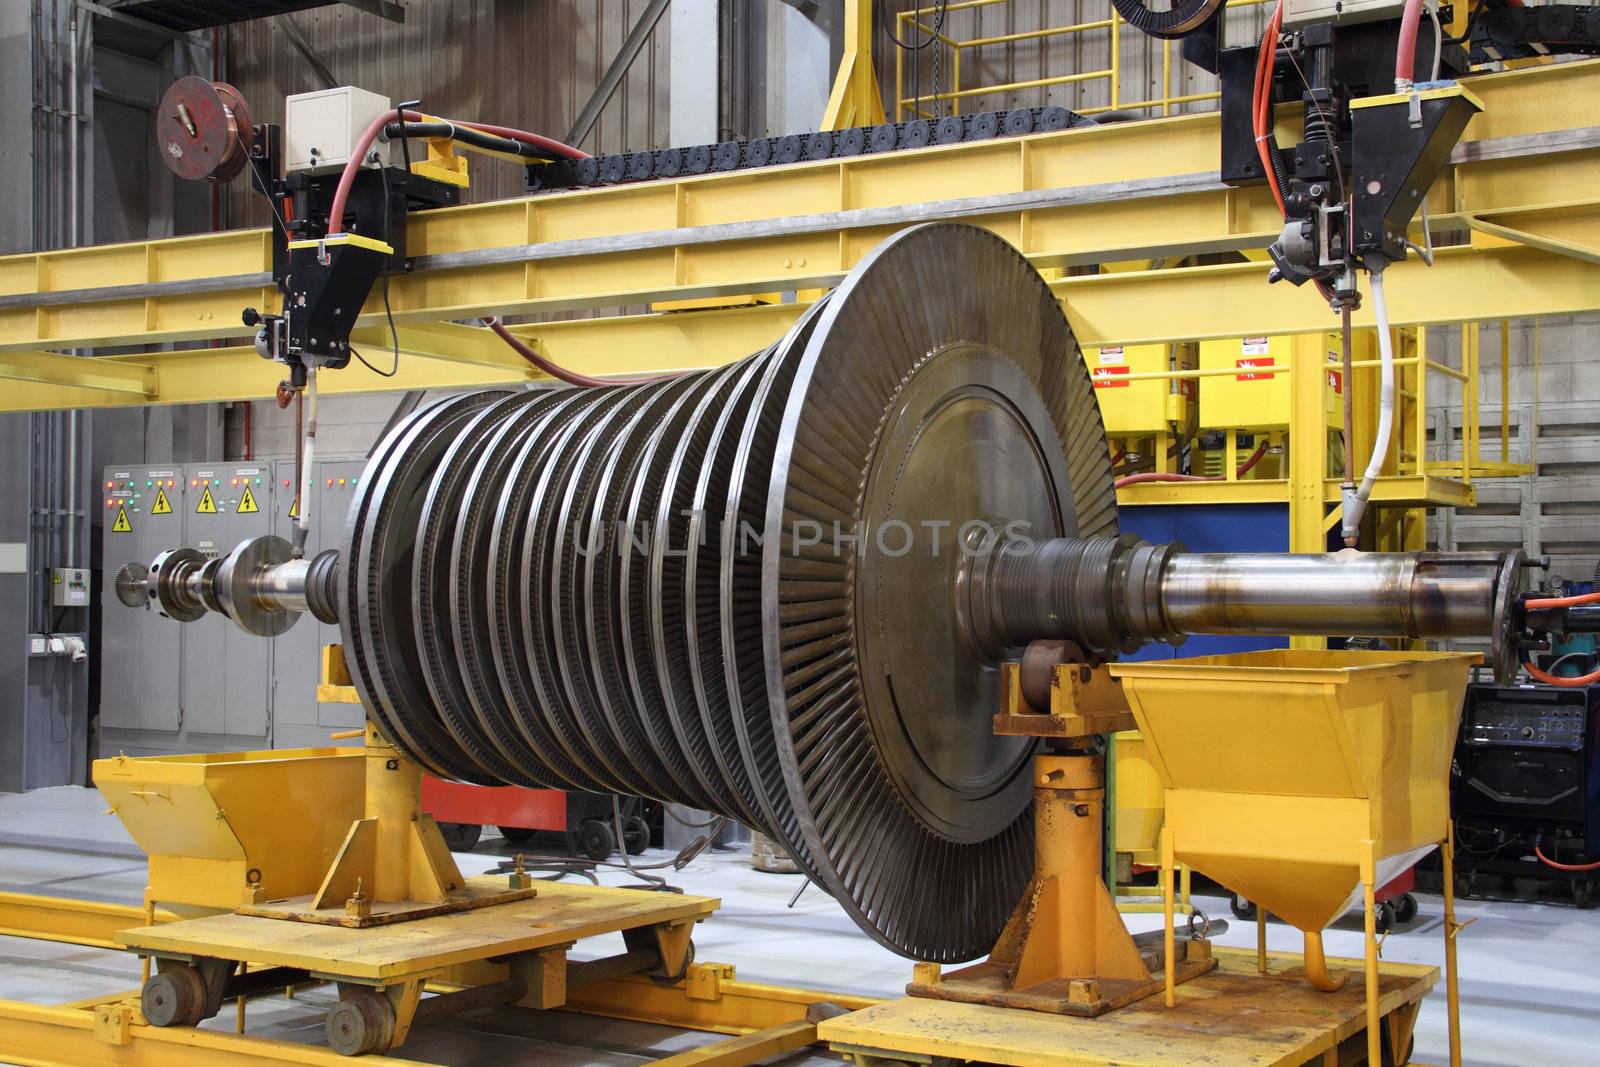 Industrial turbine at the workshop by photosoup